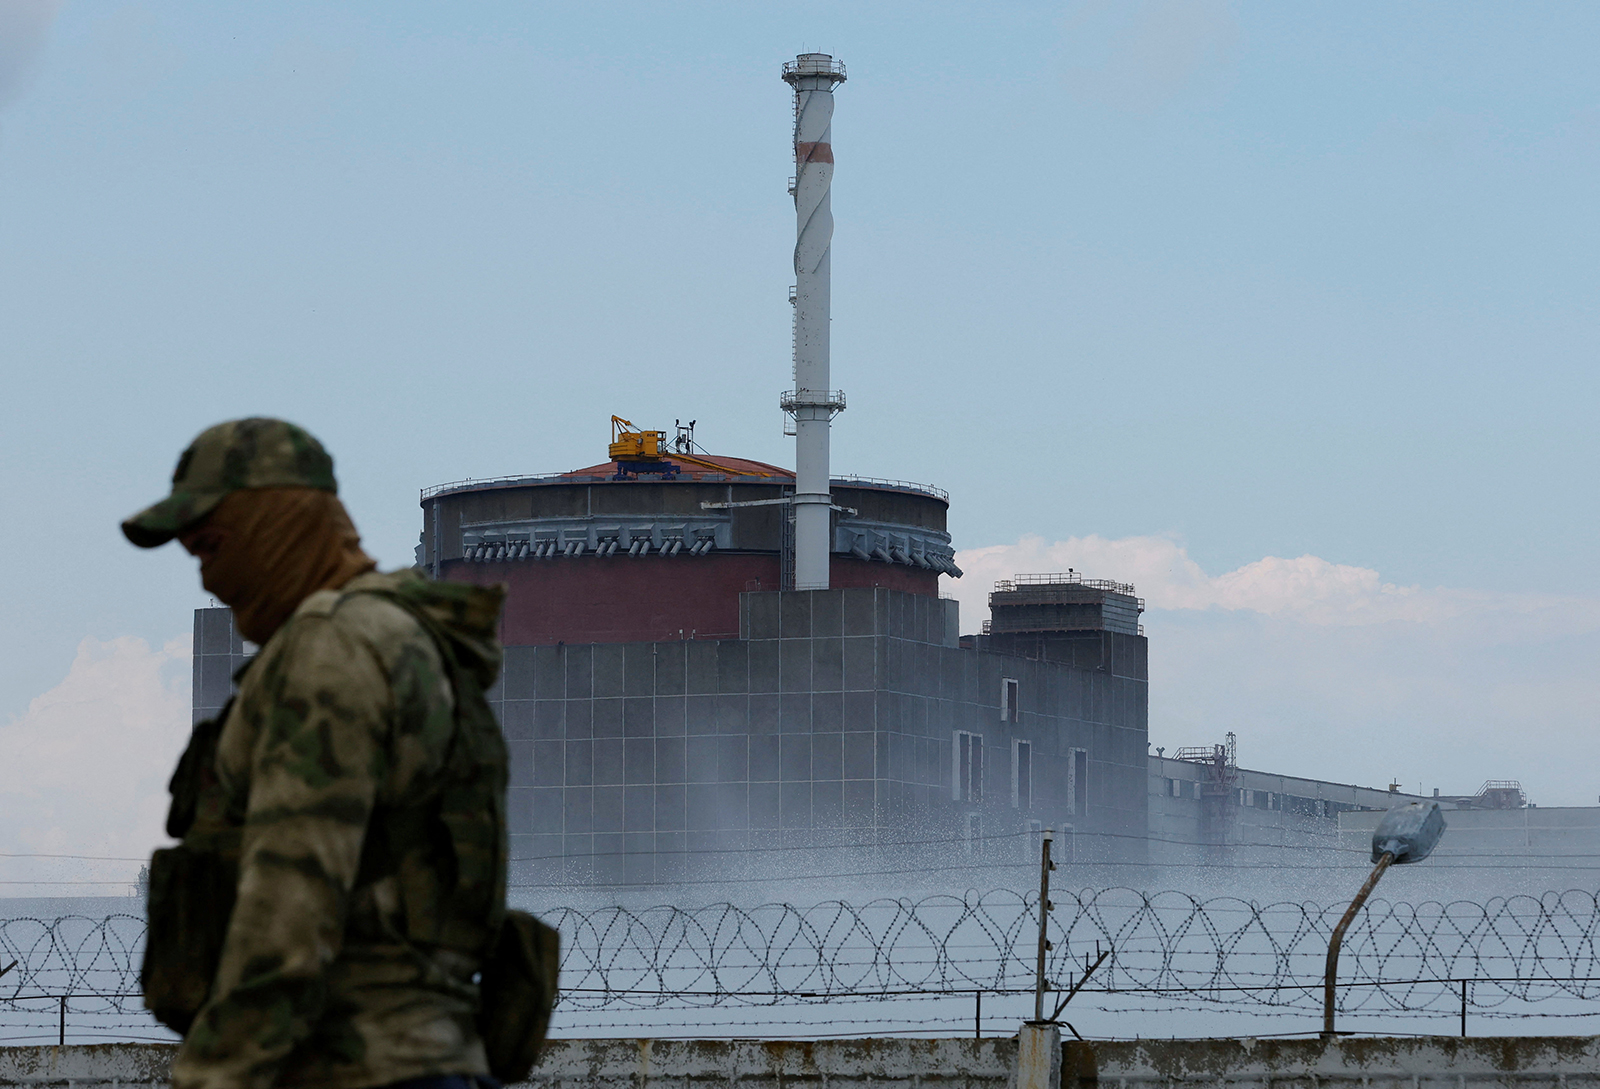 A serviceman with a Russian flag on his uniform stands guard near the Zaporizhzhia Nuclear Power Plant outside the Russian-controlled city of Enerhodar in the Zaporizhzhia region, Ukraine on August 4.